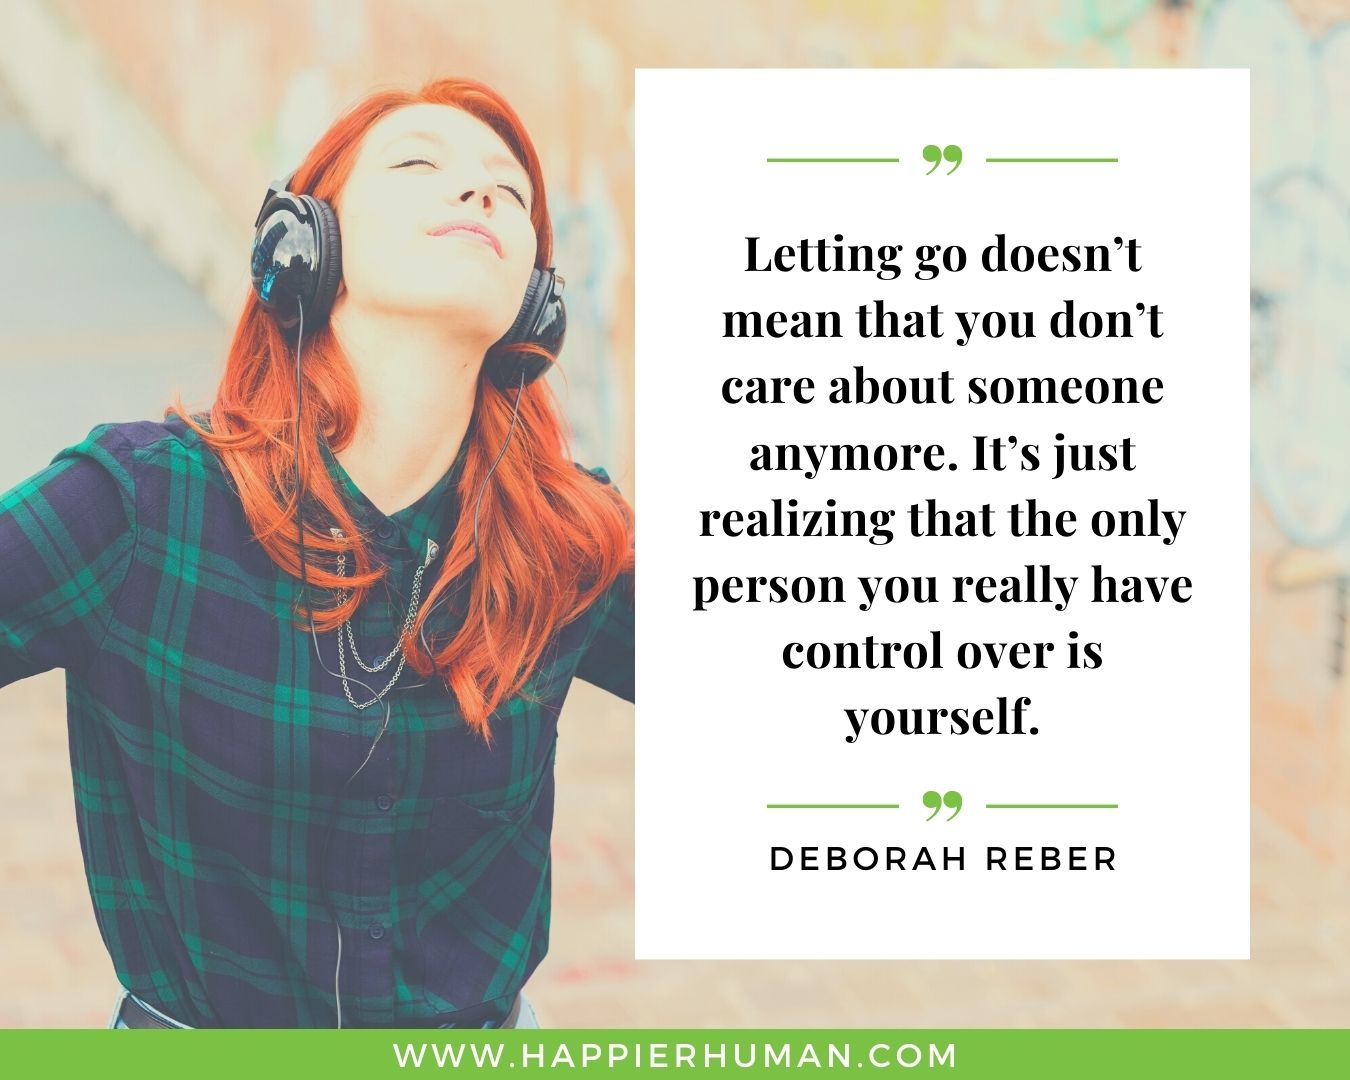 Toxic People Quotes - “Letting go doesn’t mean that you don’t care about someone anymore. It’s just realizing that the only person you really have control over is yourself.” – Deborah Reber